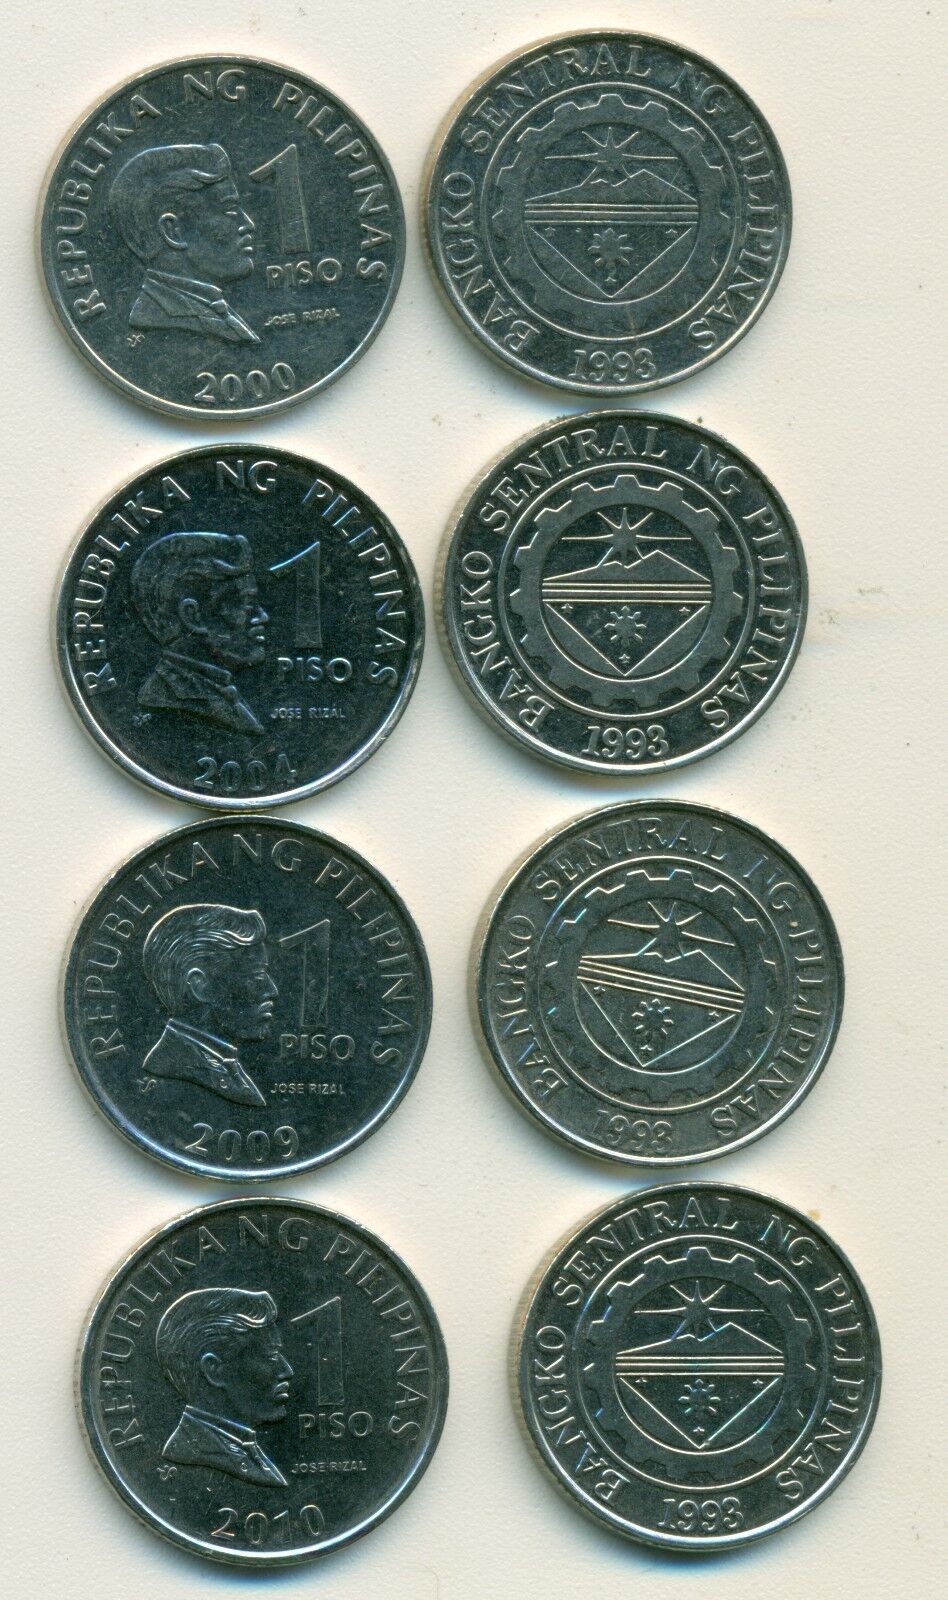 4 DIFFERENT 1 PISO COINS from the PHILIPPINES (2000, 2004, 2009 & 2010)